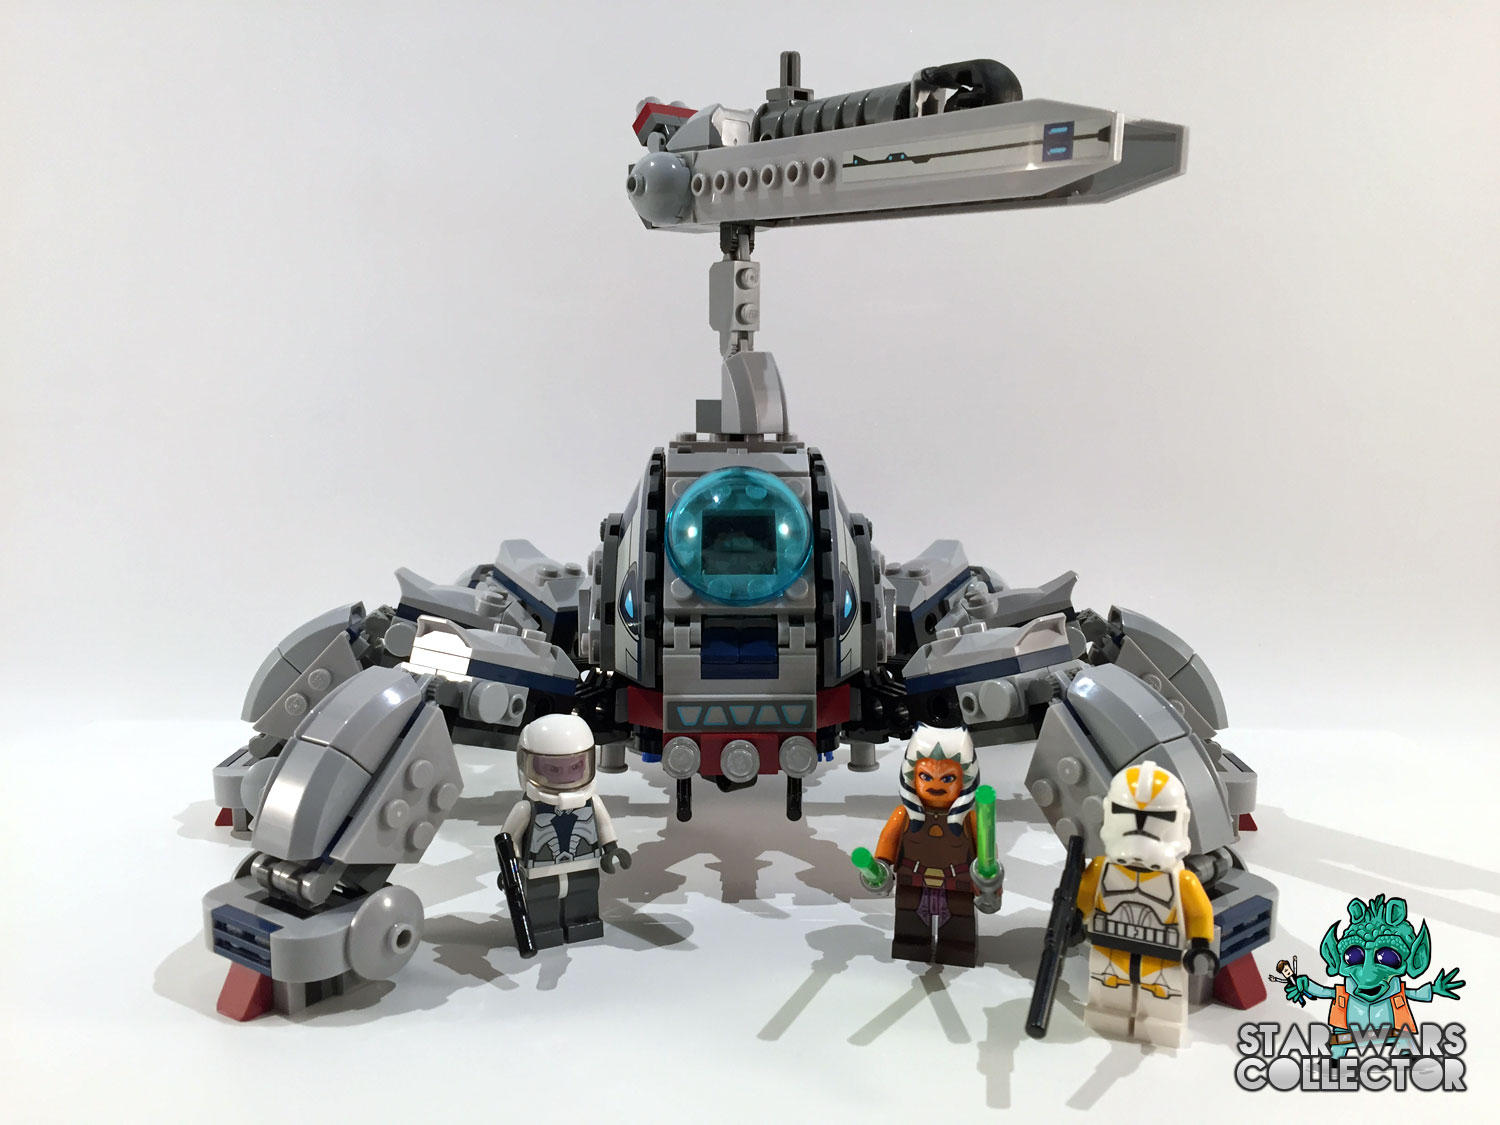 LEGO Star Wars 75013 Umbaran MHC (Mobile Heavy Cannon)